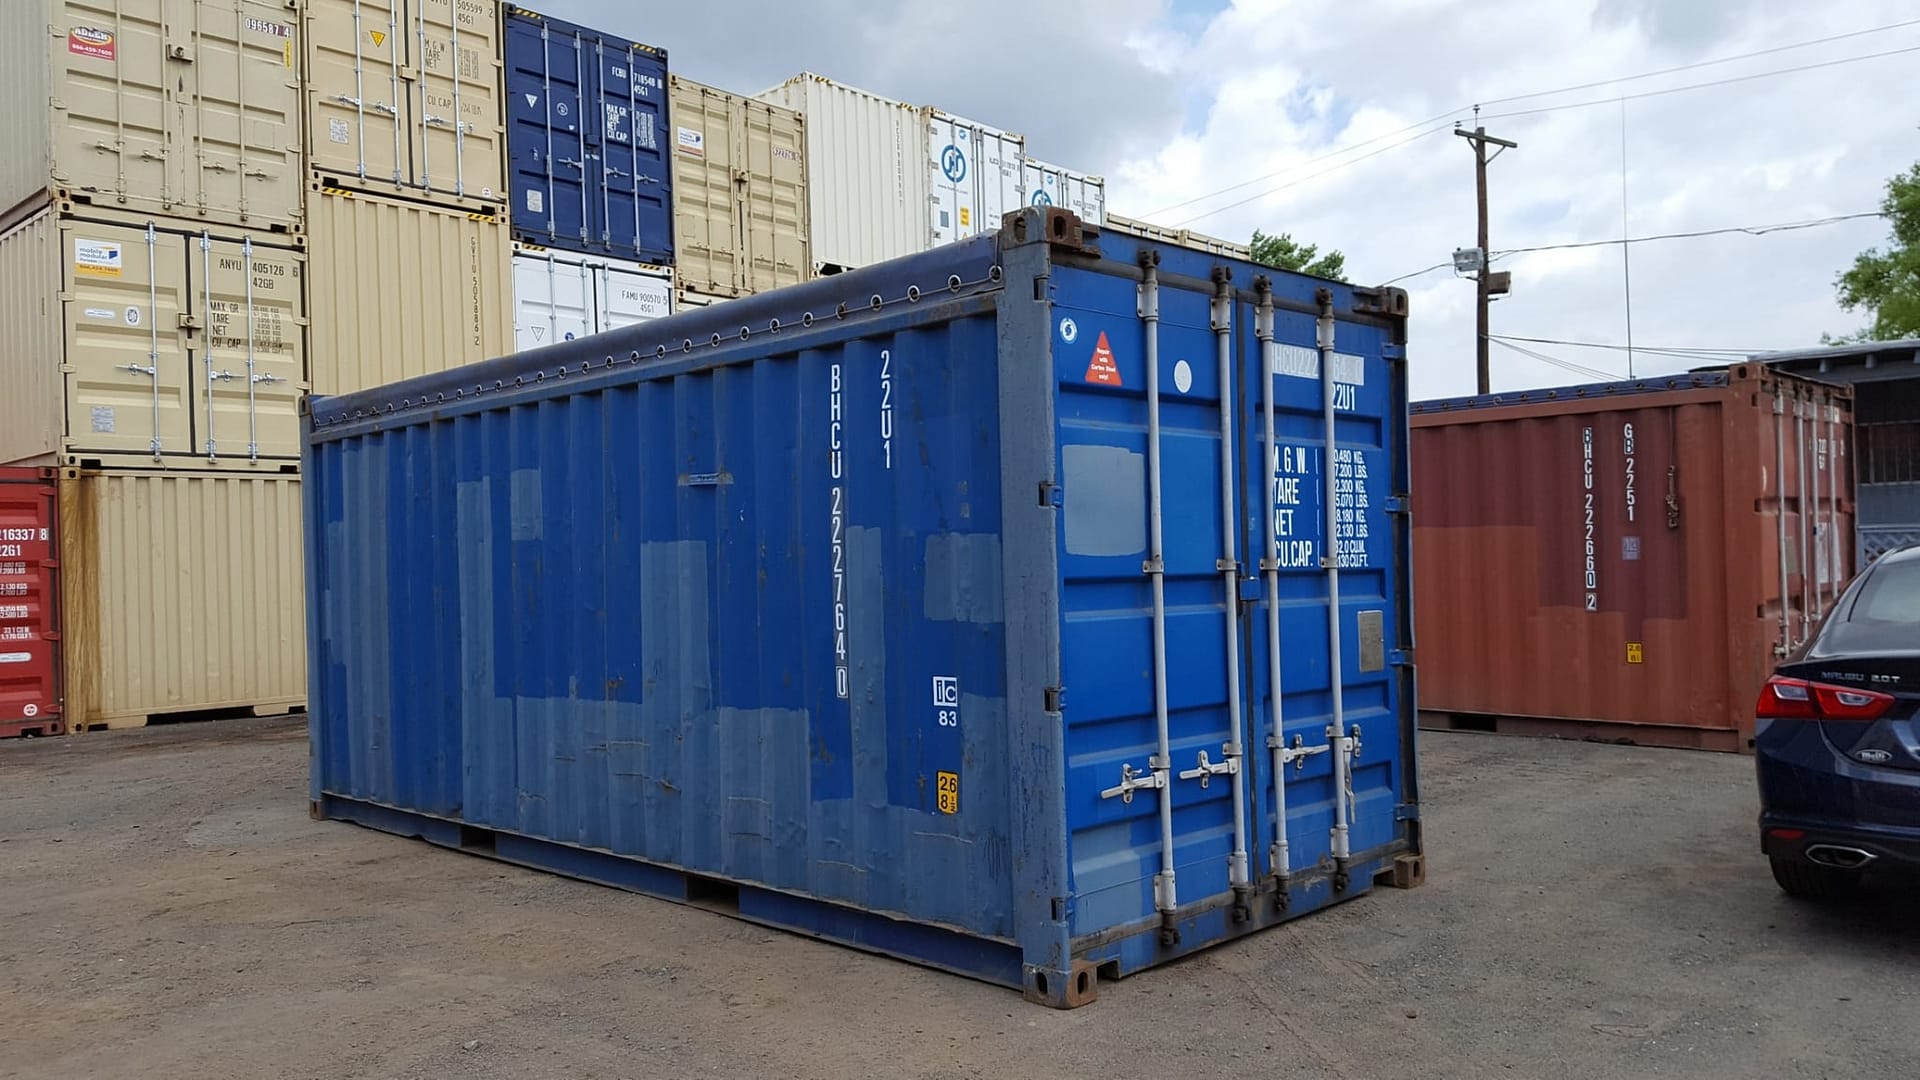 TRS Containers stocks used opentops for export or domestic use